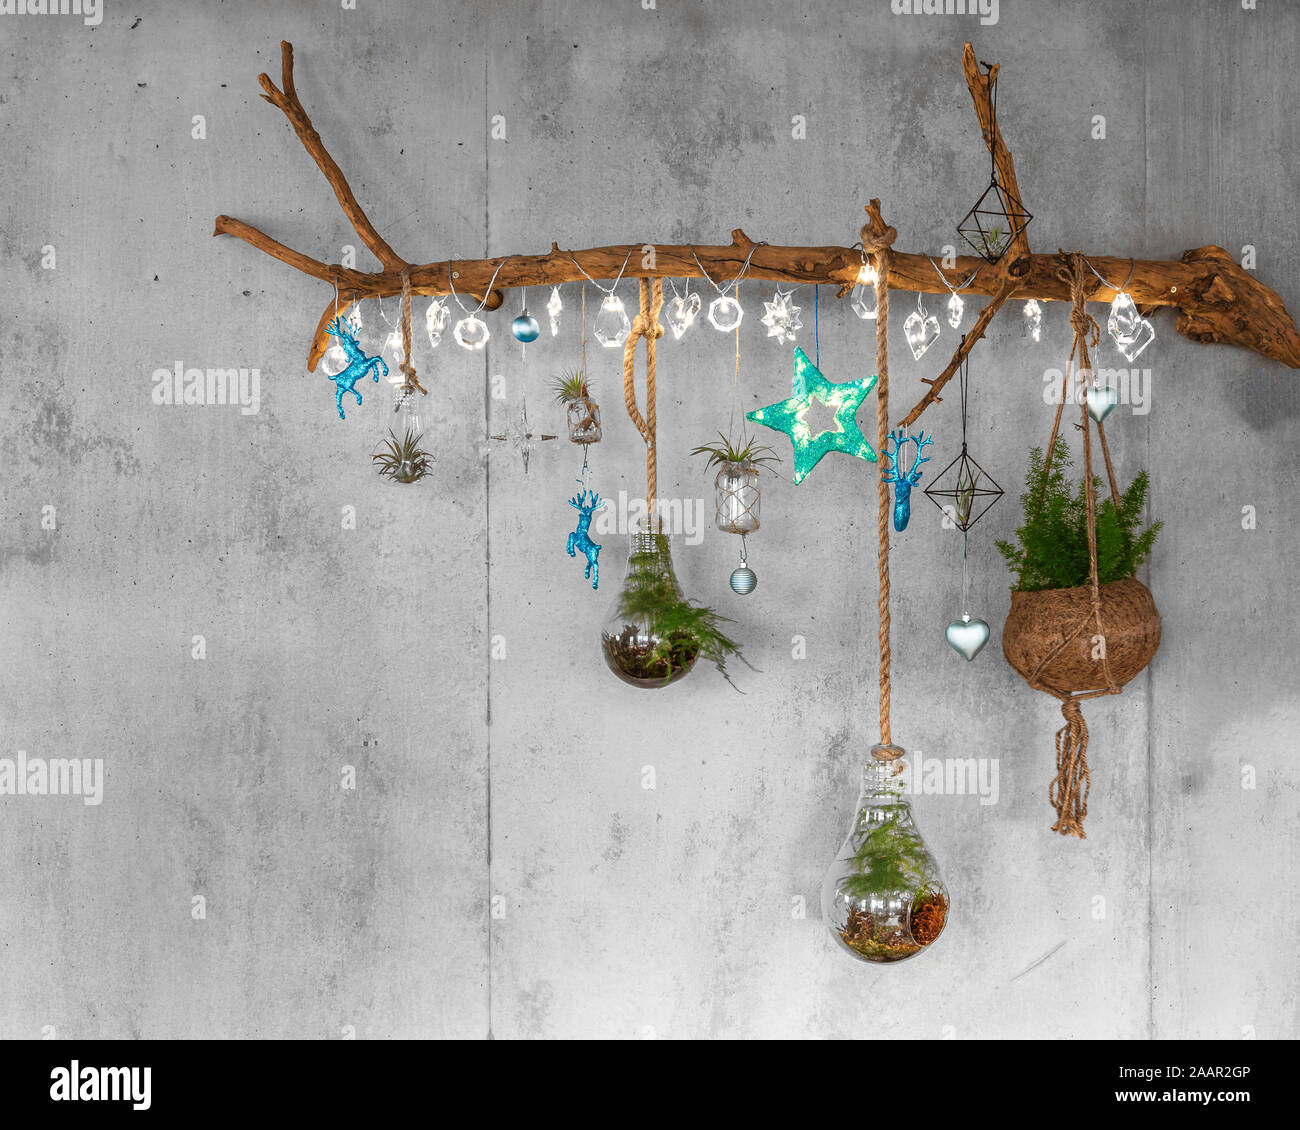 Decorative Wooden Branch with fir branches and hanging teal christmas baubles, silver lights like snowflakes, fern and air plant, on a modern cement o Stock Photo